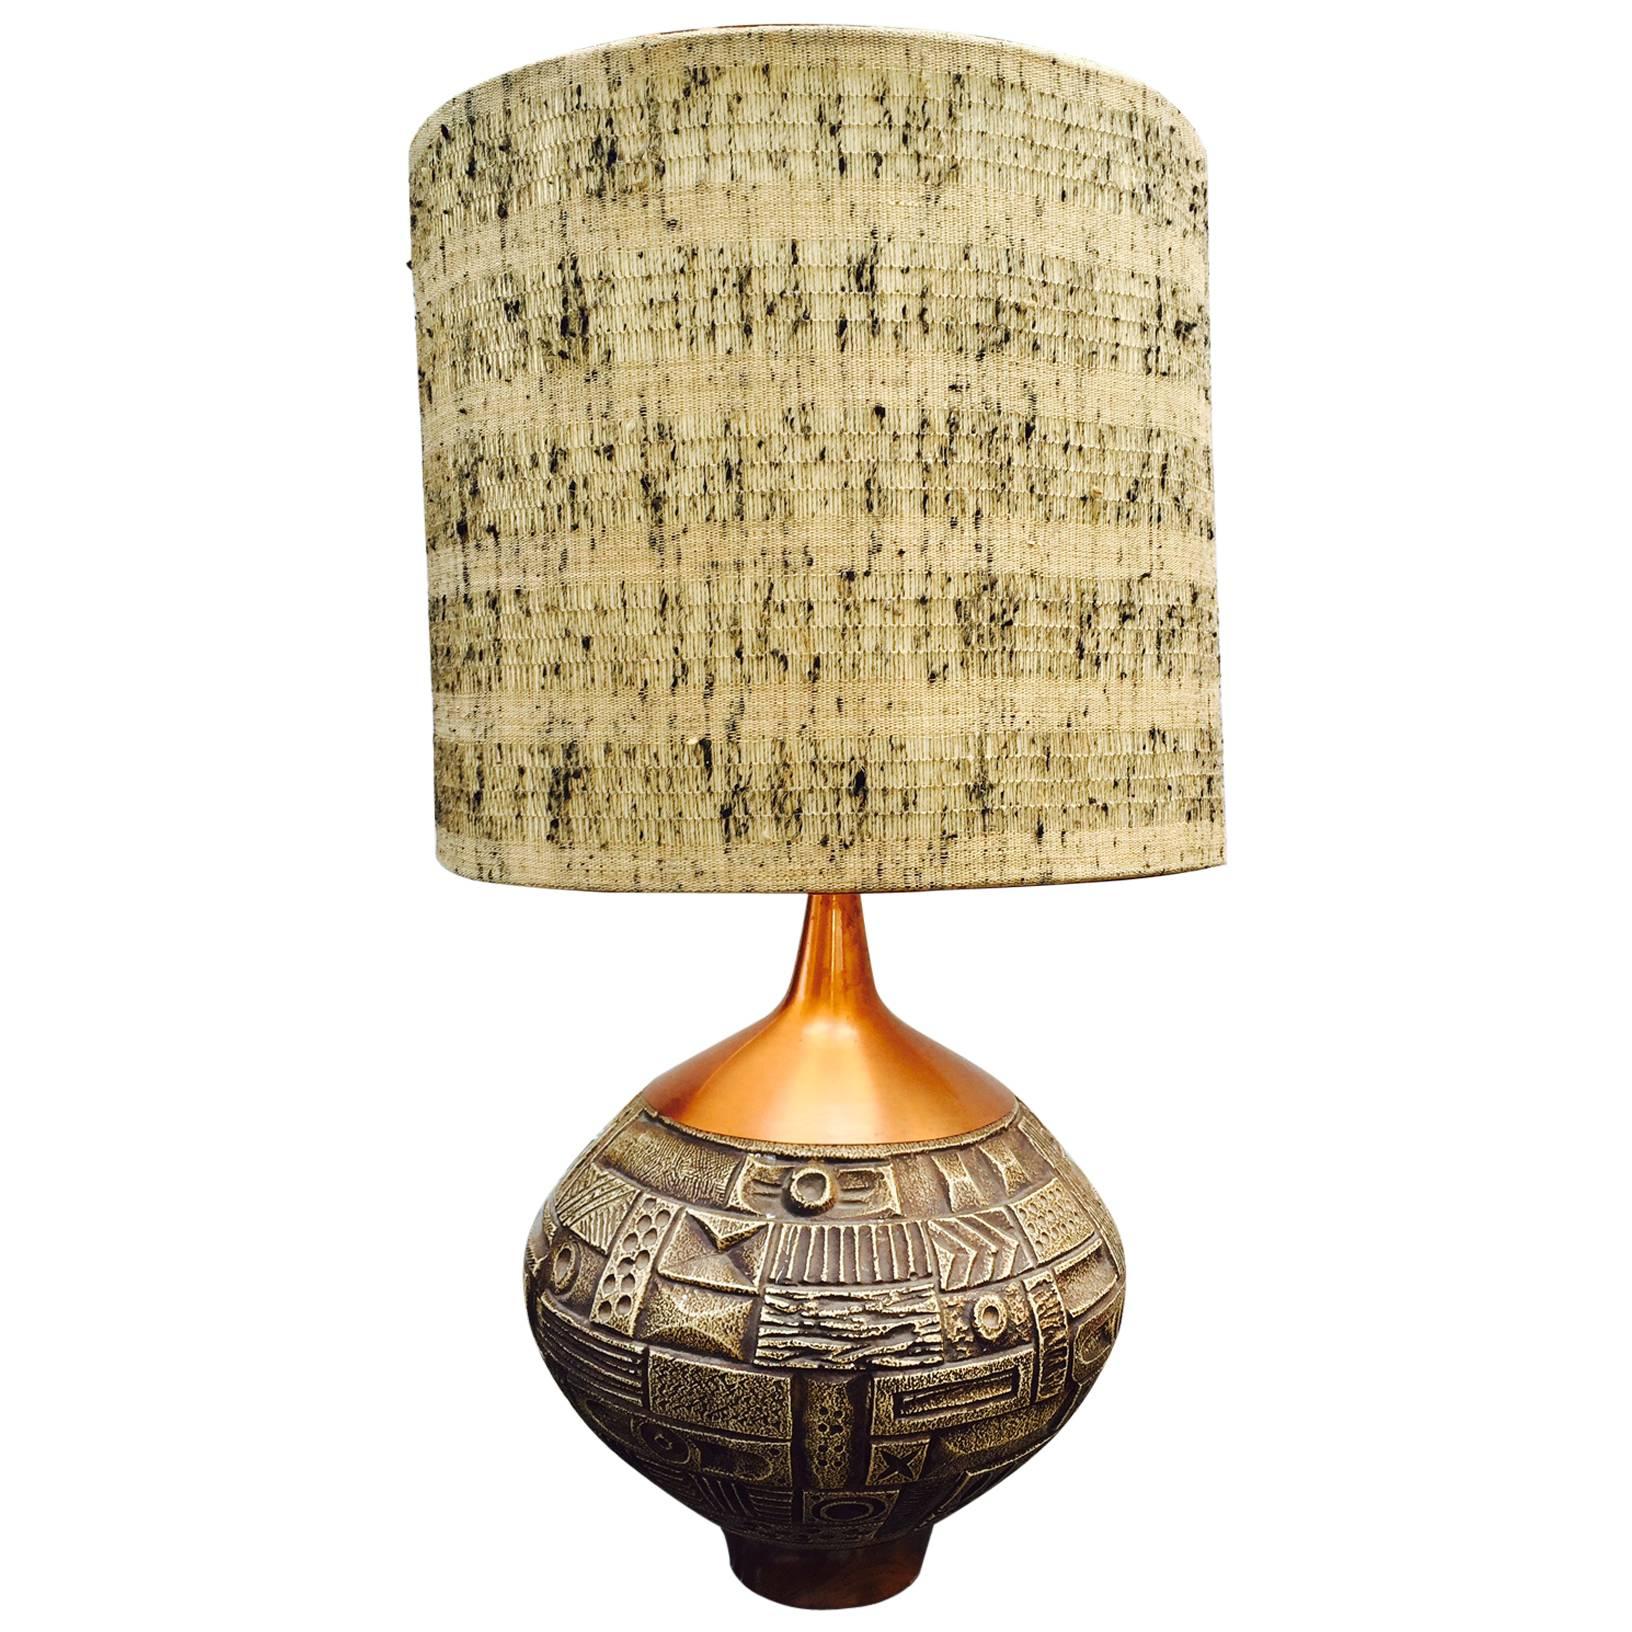 Mid-Century Pottery and Copper Sculptural Table Lamp